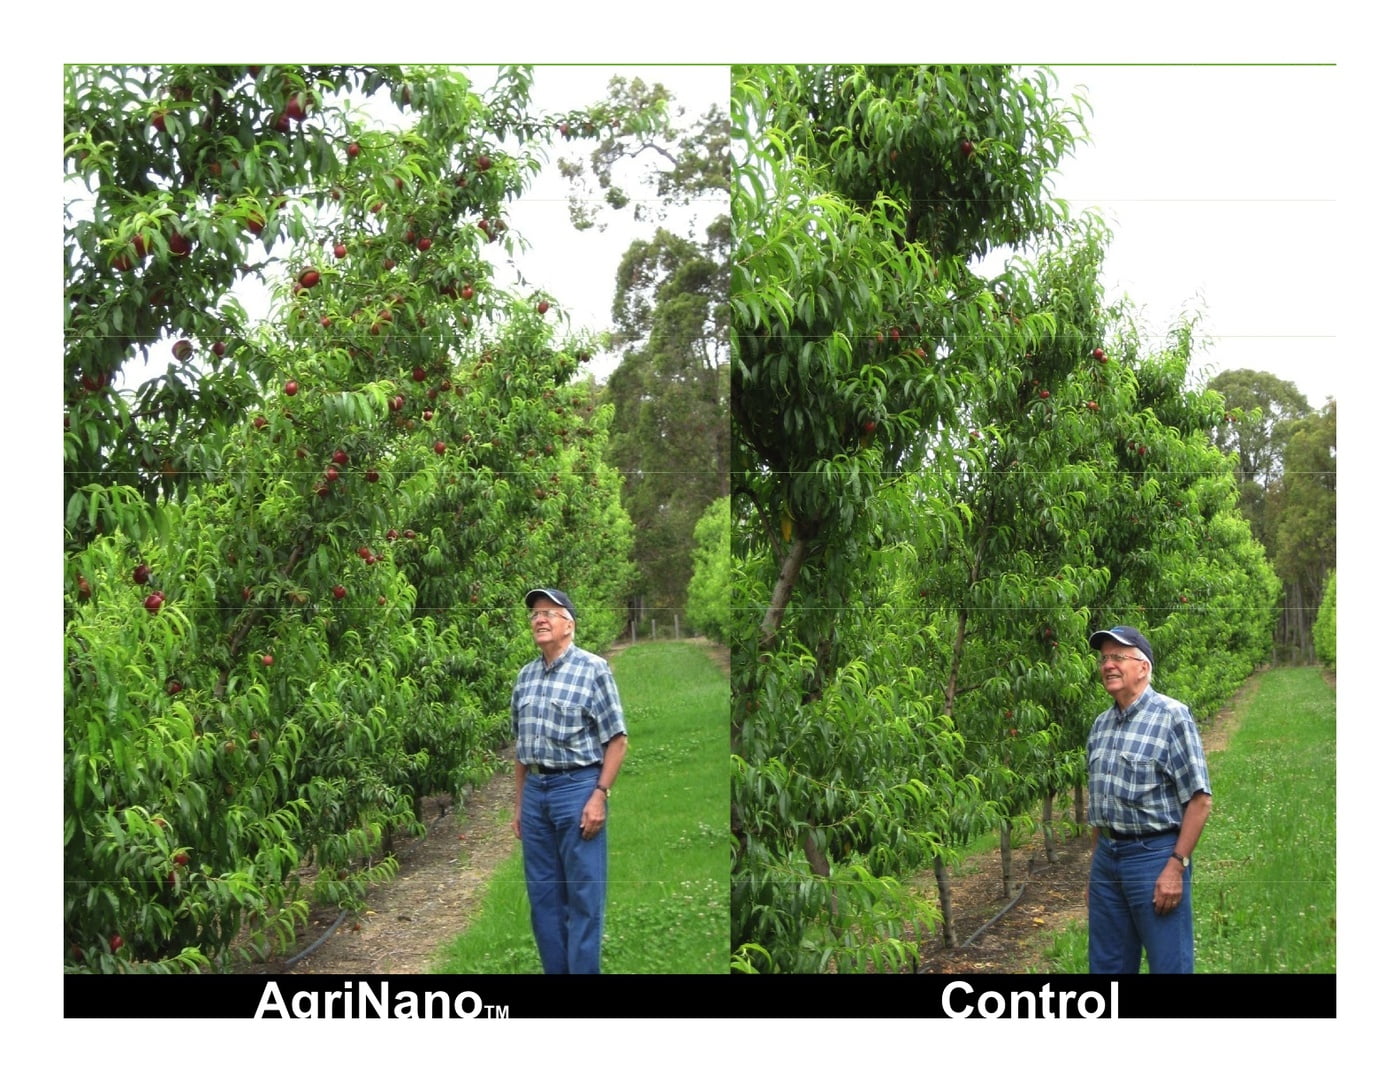 An image showing apple trees treated with AgriNano on the left and traditional treatment on the right. The left is notably larger and more plentiful. 